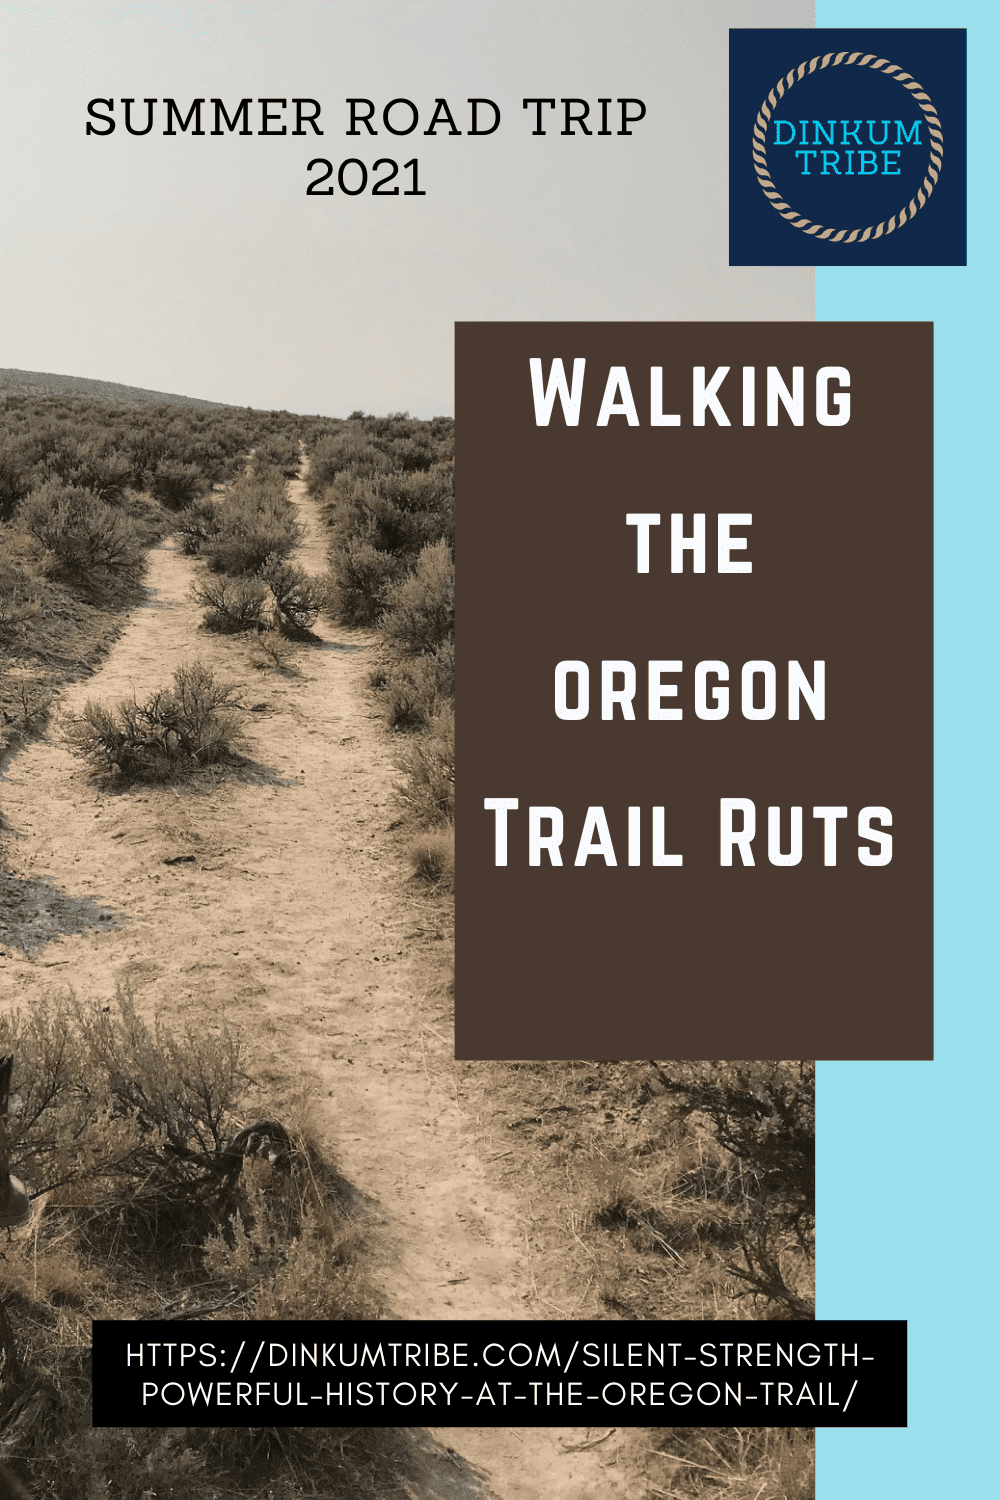 pinnable image of Oregon Trail ruts with Dinkum Tribe logo and URL. Text says: walking the Oregon Trail ruts summer road trip 2021